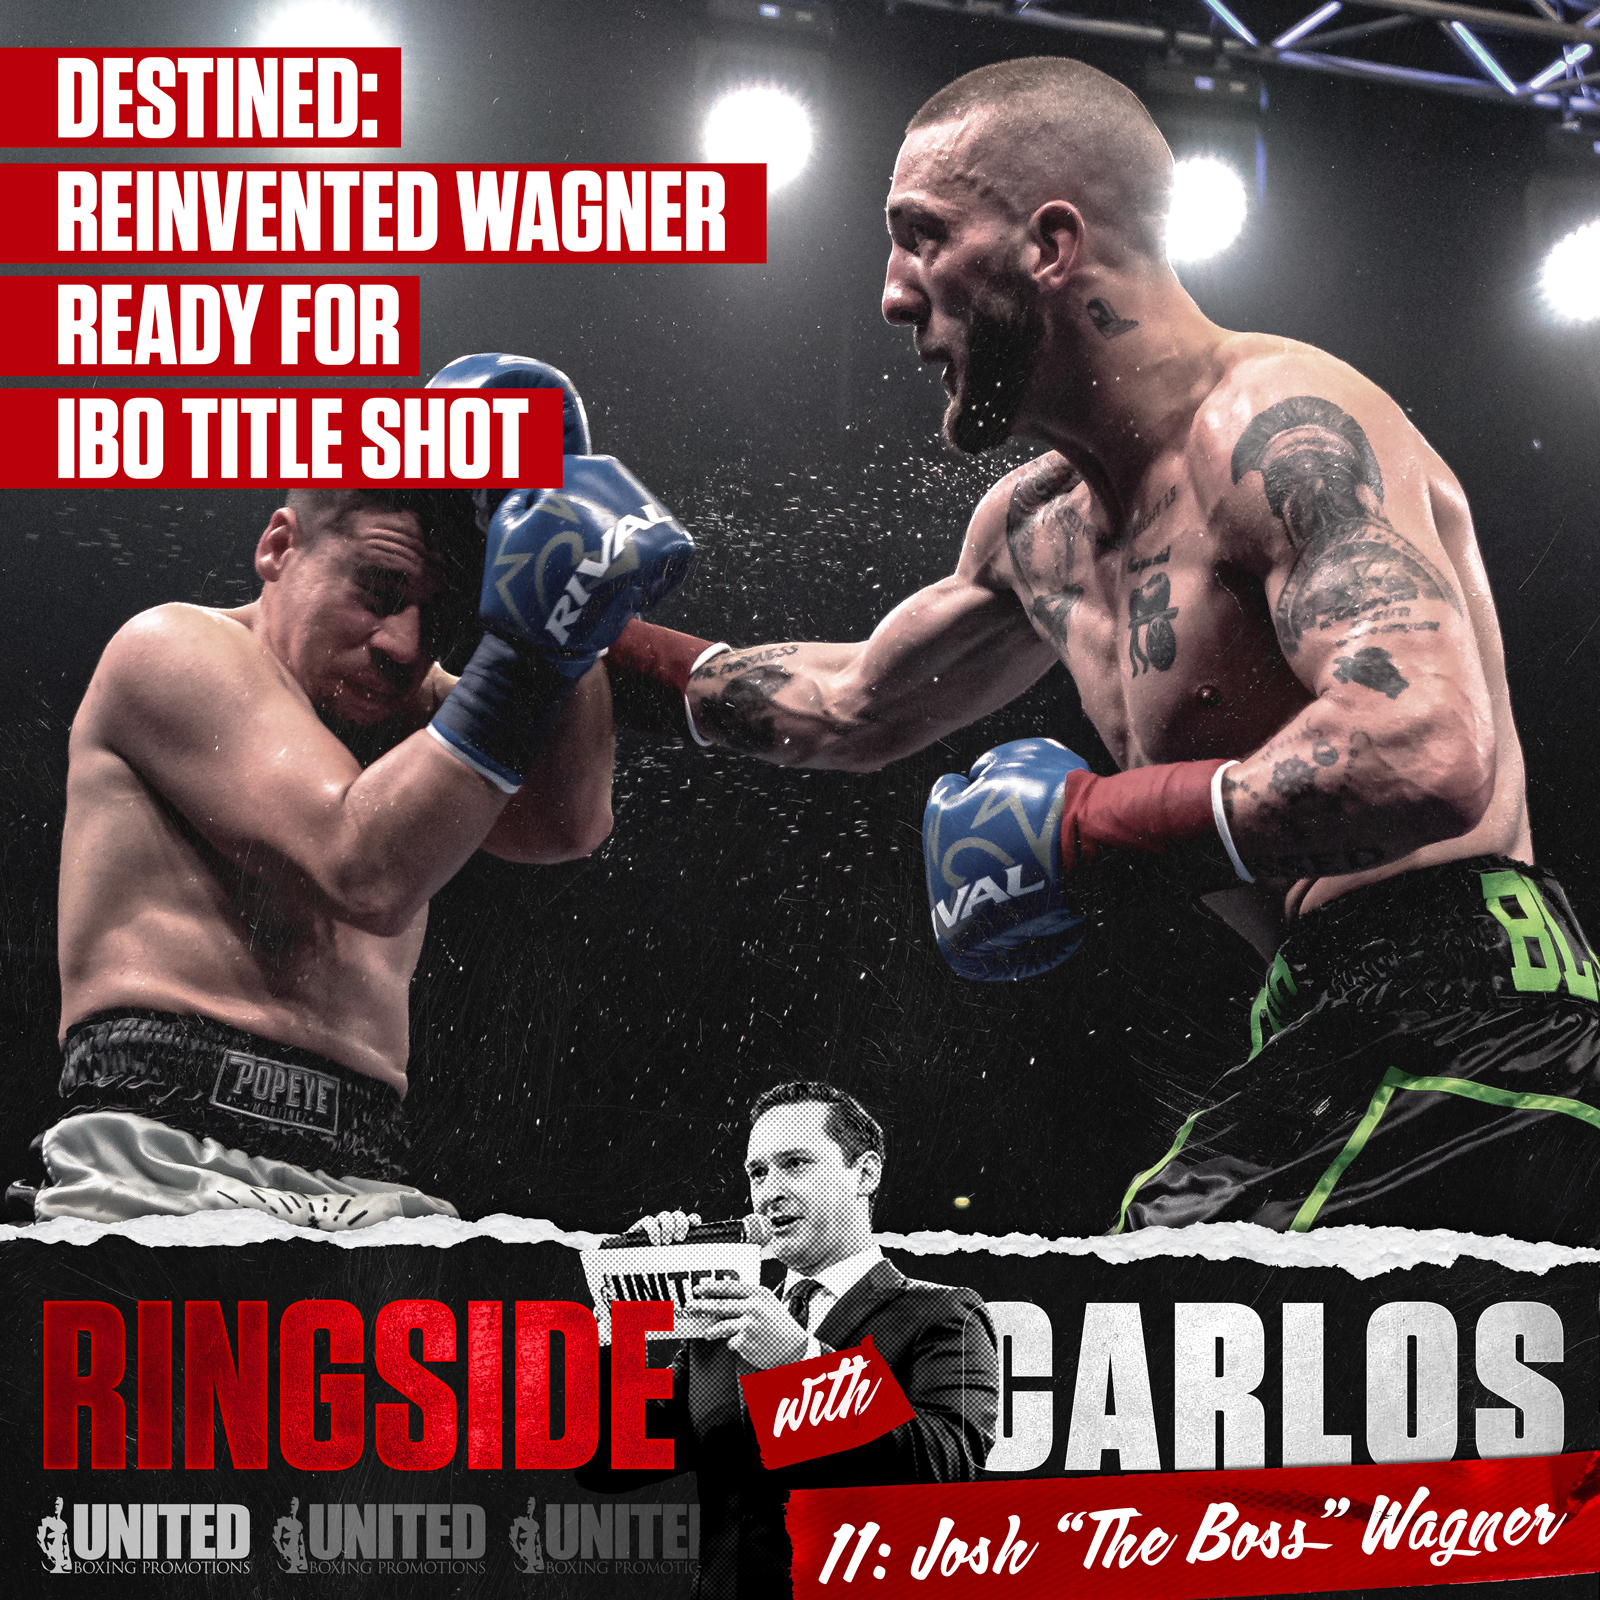 11 – “DESTINED”: REINVENTED WAGNER READY FOR IBO TITLE SHOT